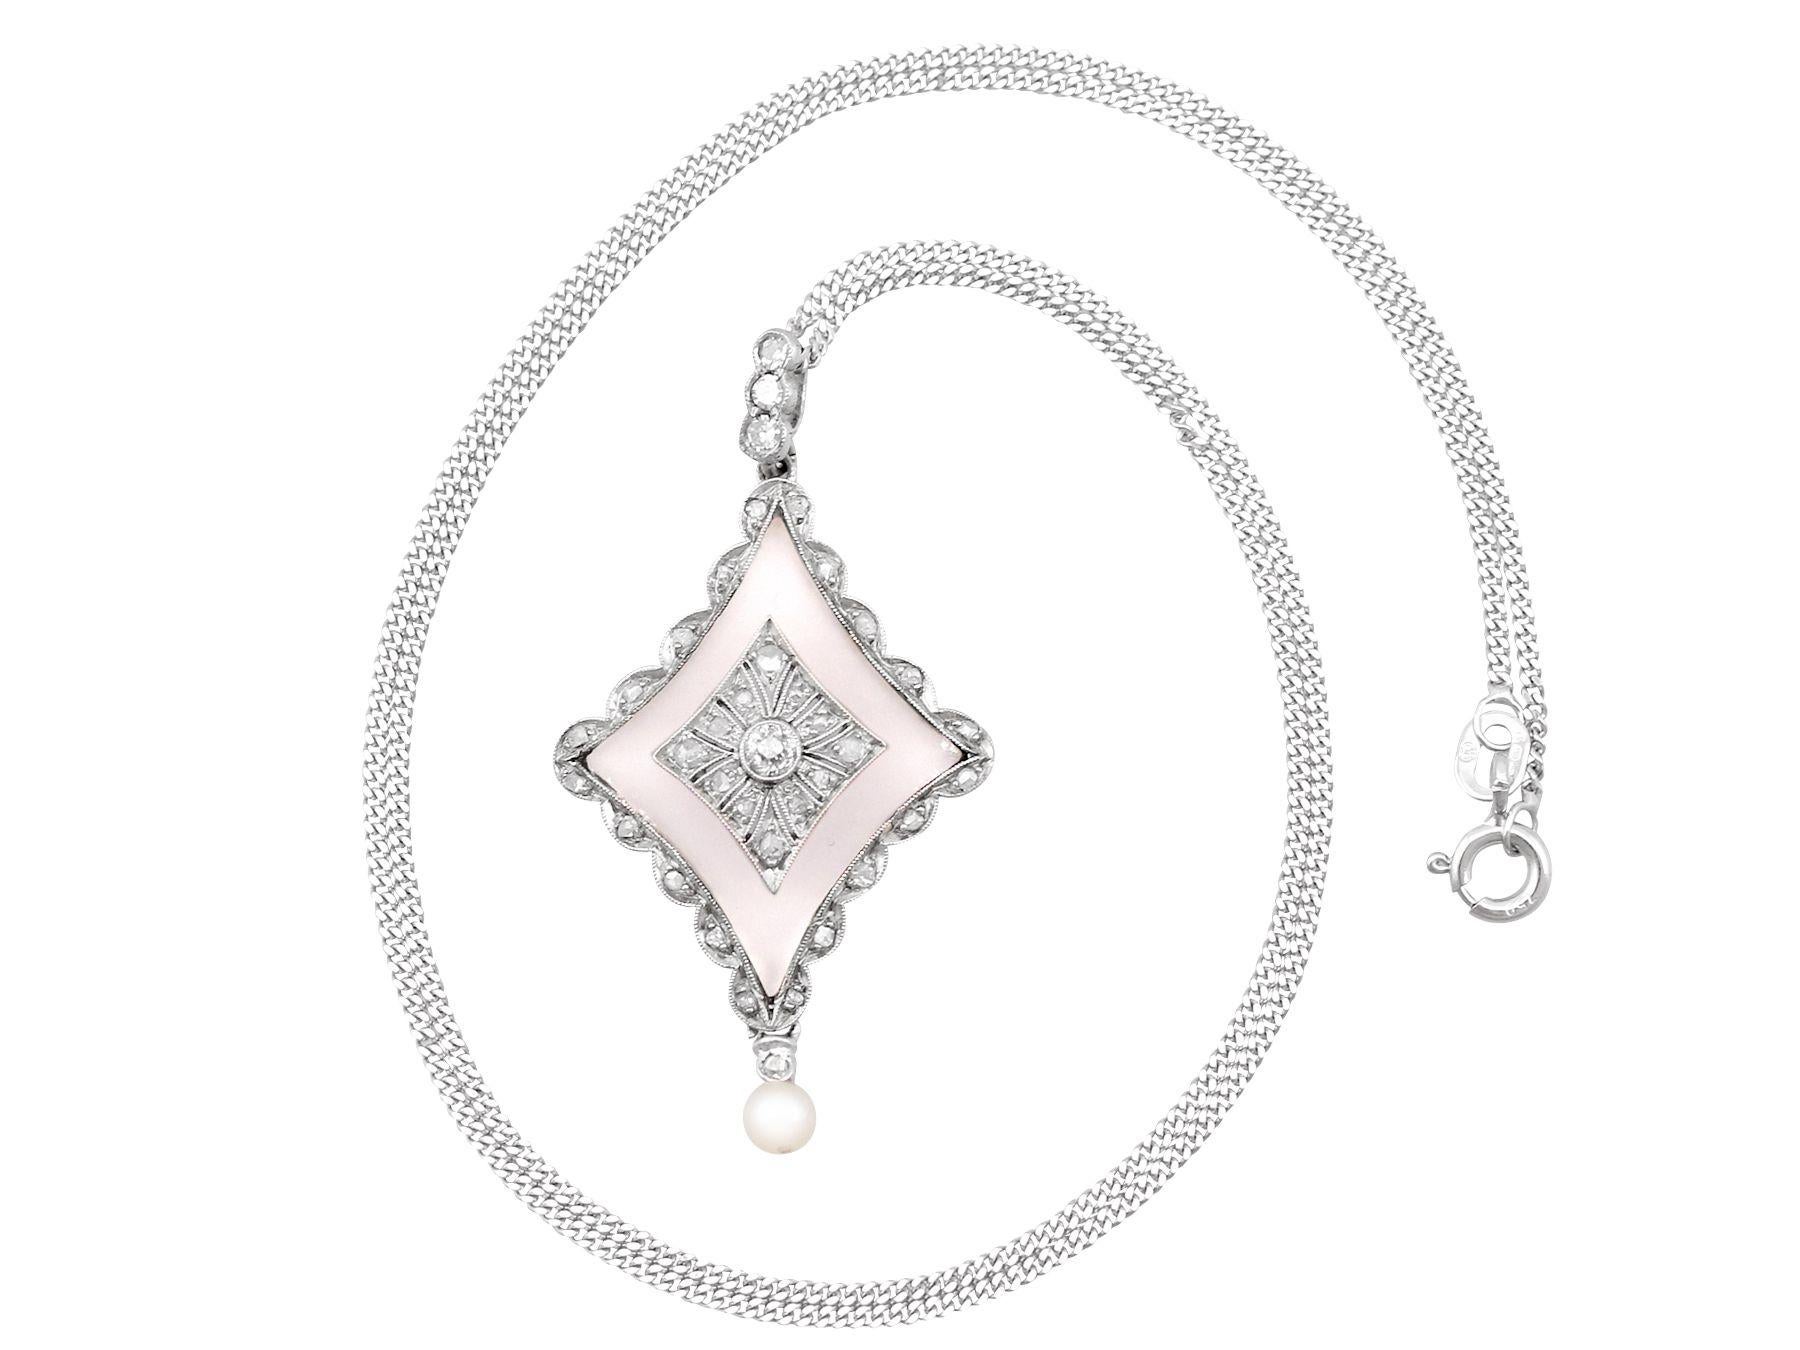 An impressive antique 0.32 carat diamond and seed pearl, rock crystal and 9 karat white gold pendant; part of our diverse antique jewelry and estate jewelry collections.

This fine and impressive antique pendant has been crafted in 9k white